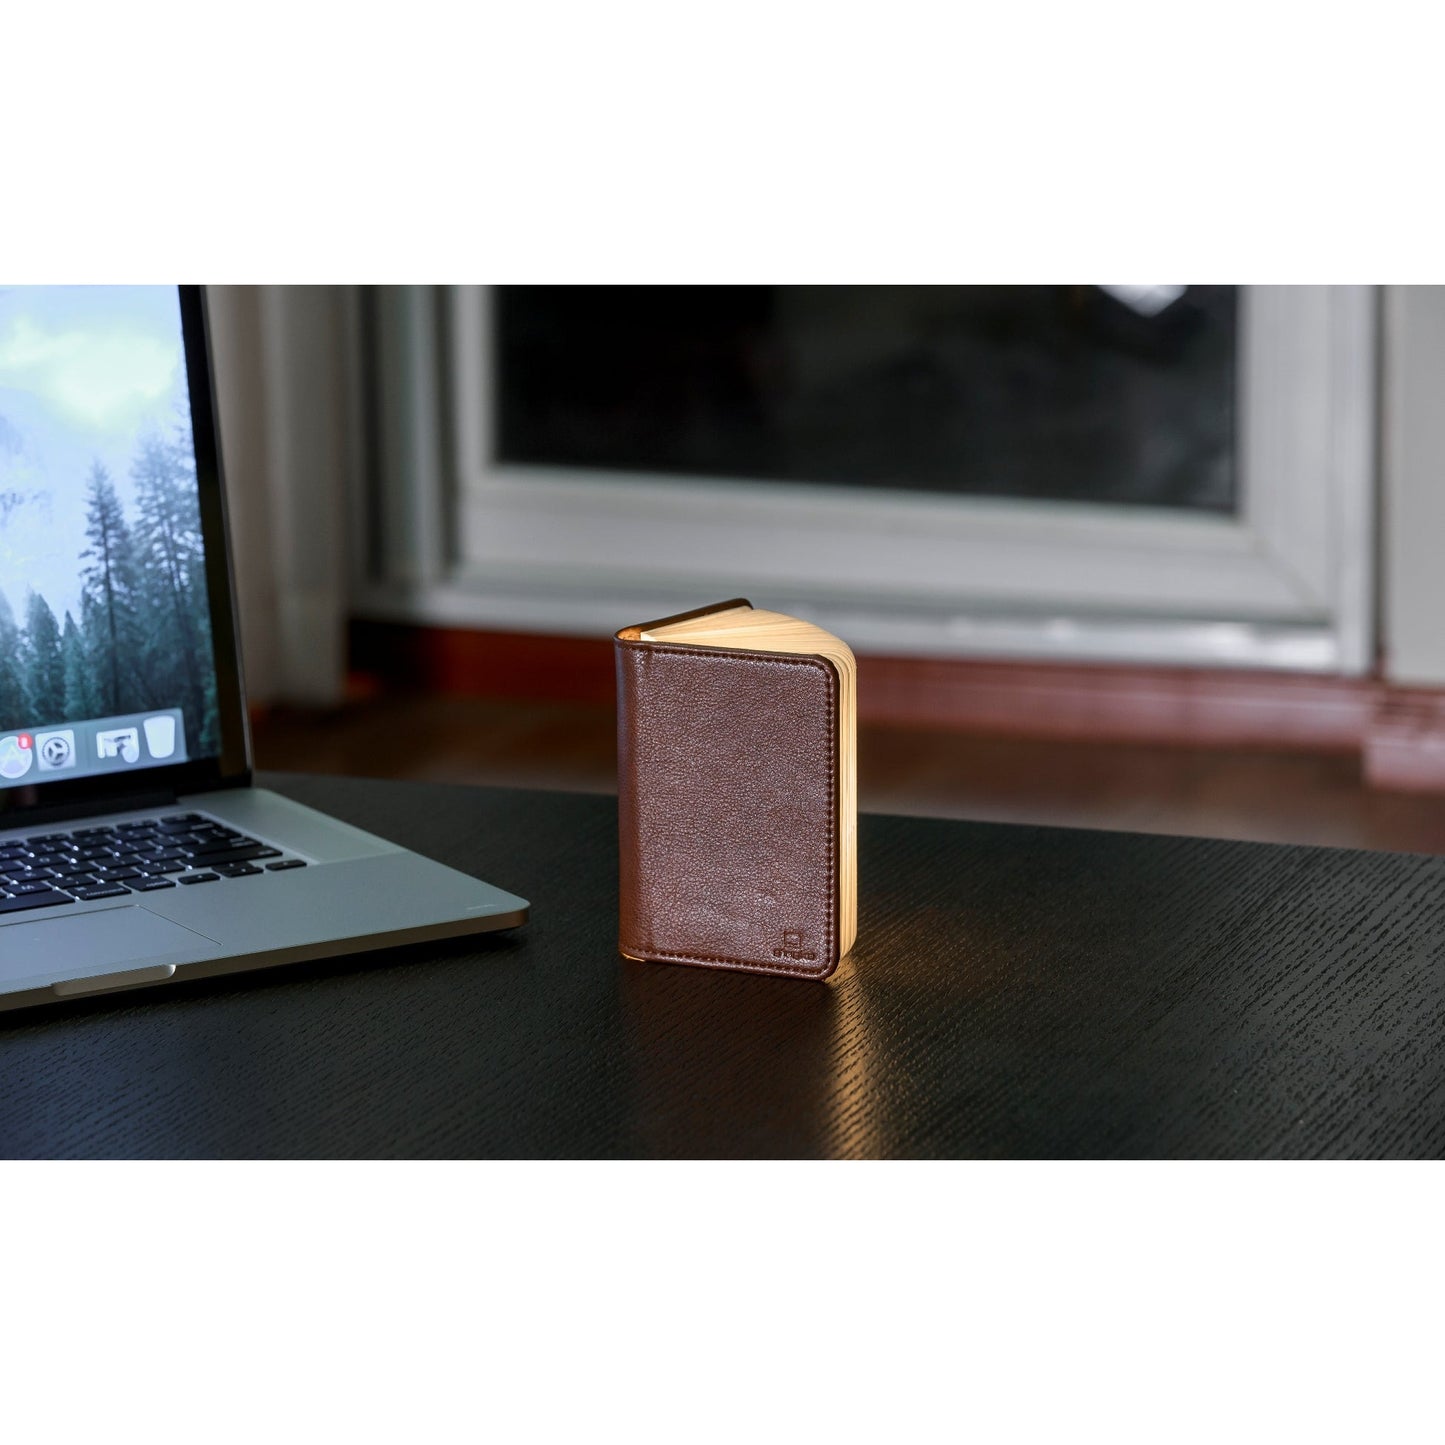 Smart Book Light - Brown Leather